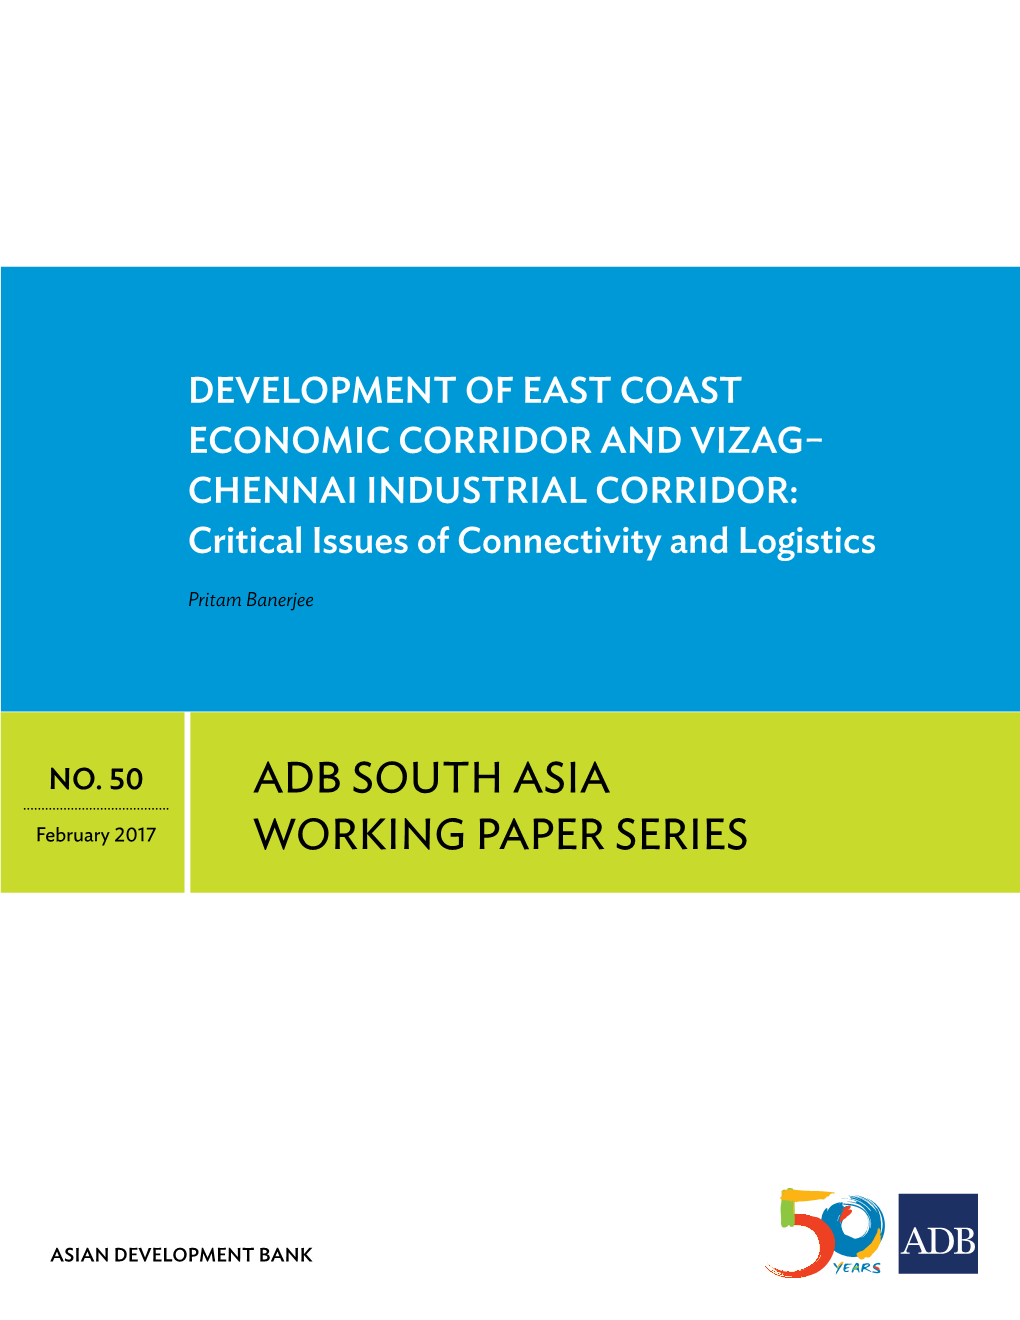 Development of East Coast Economic Corridor and Vizag–Chennai Industrial Corridor: Critical Issues of Connectivity and Logistics